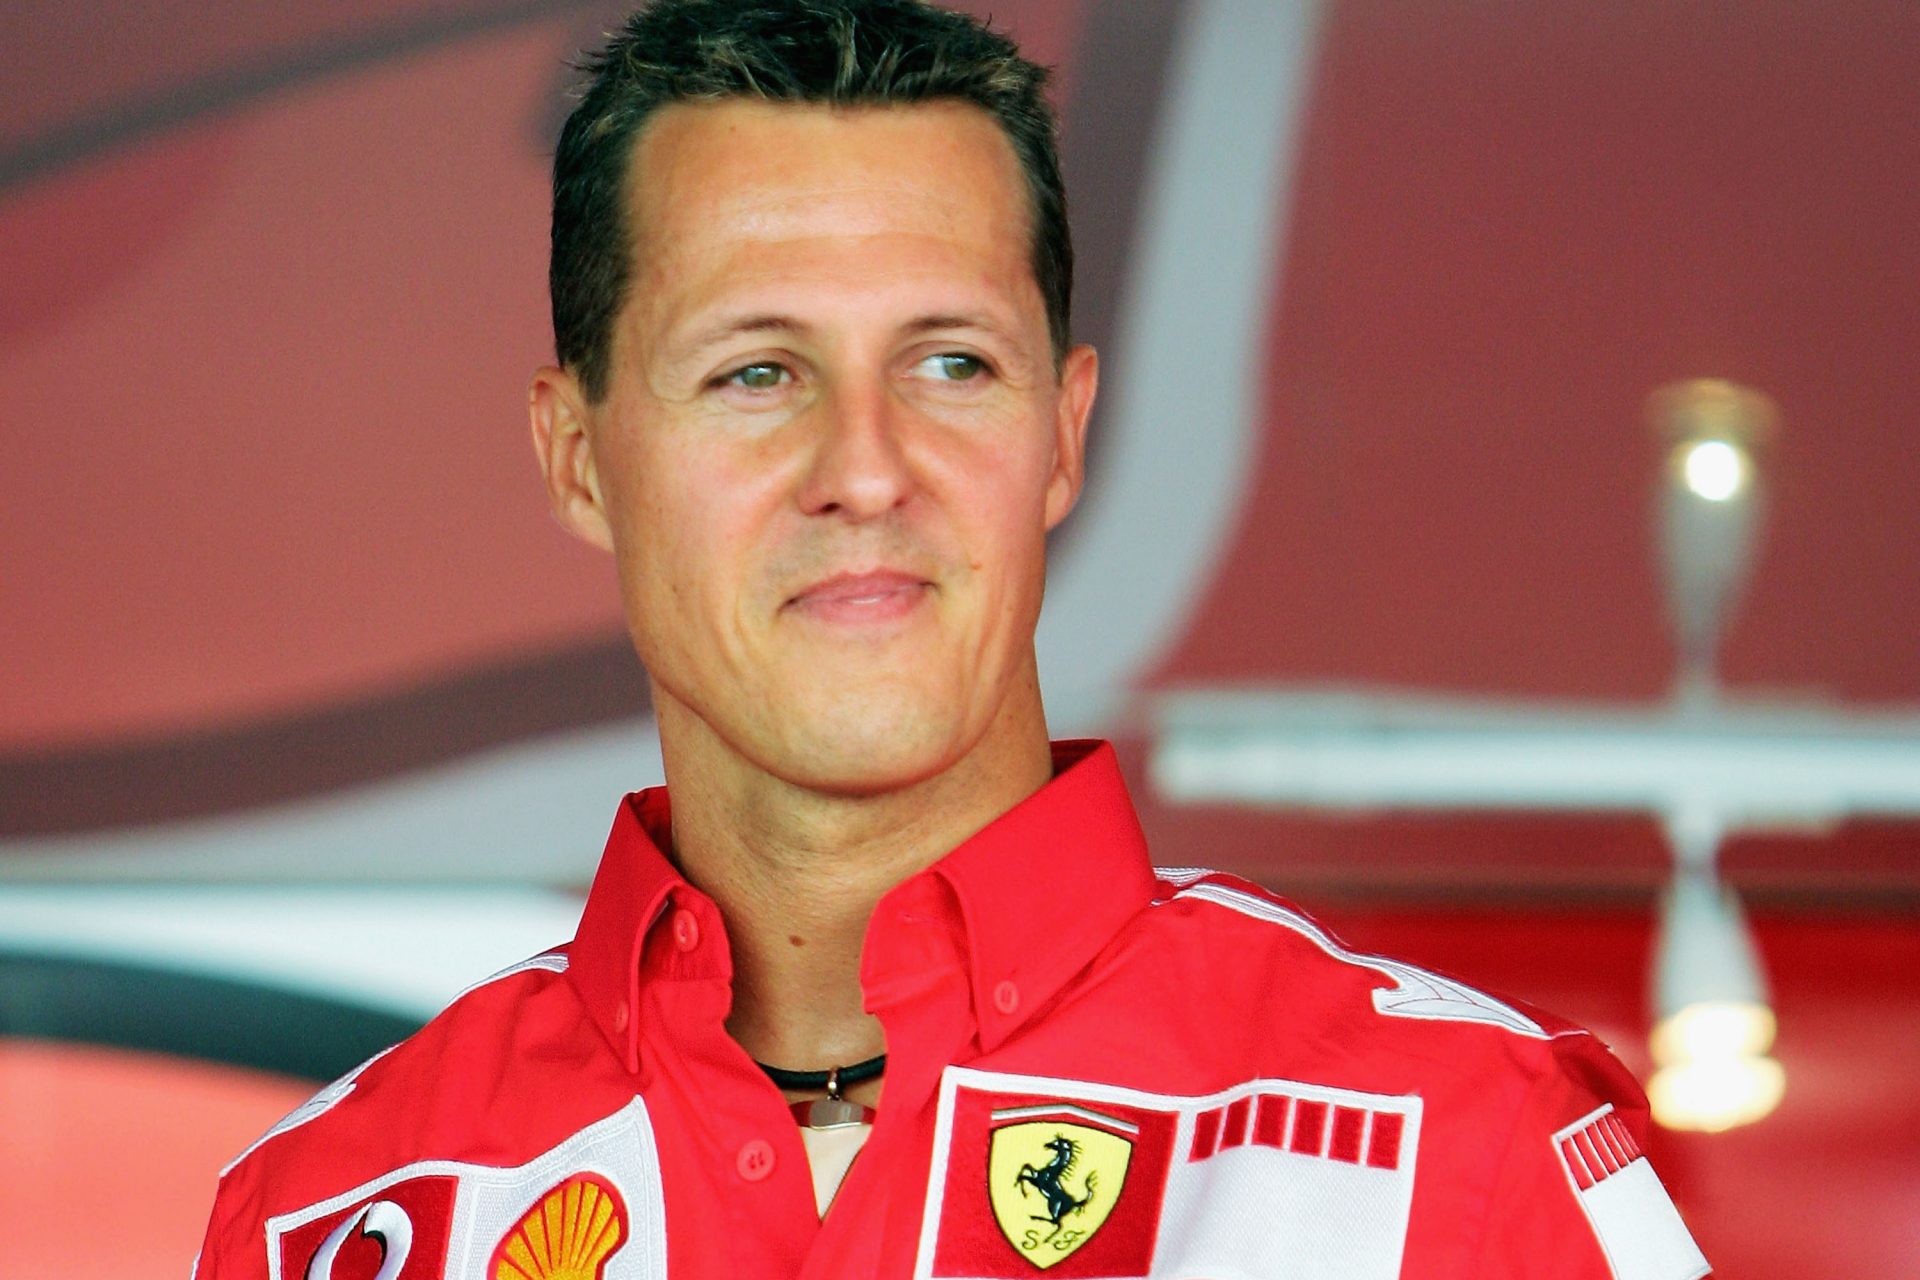 What is Michael Schumacher's current state of health?